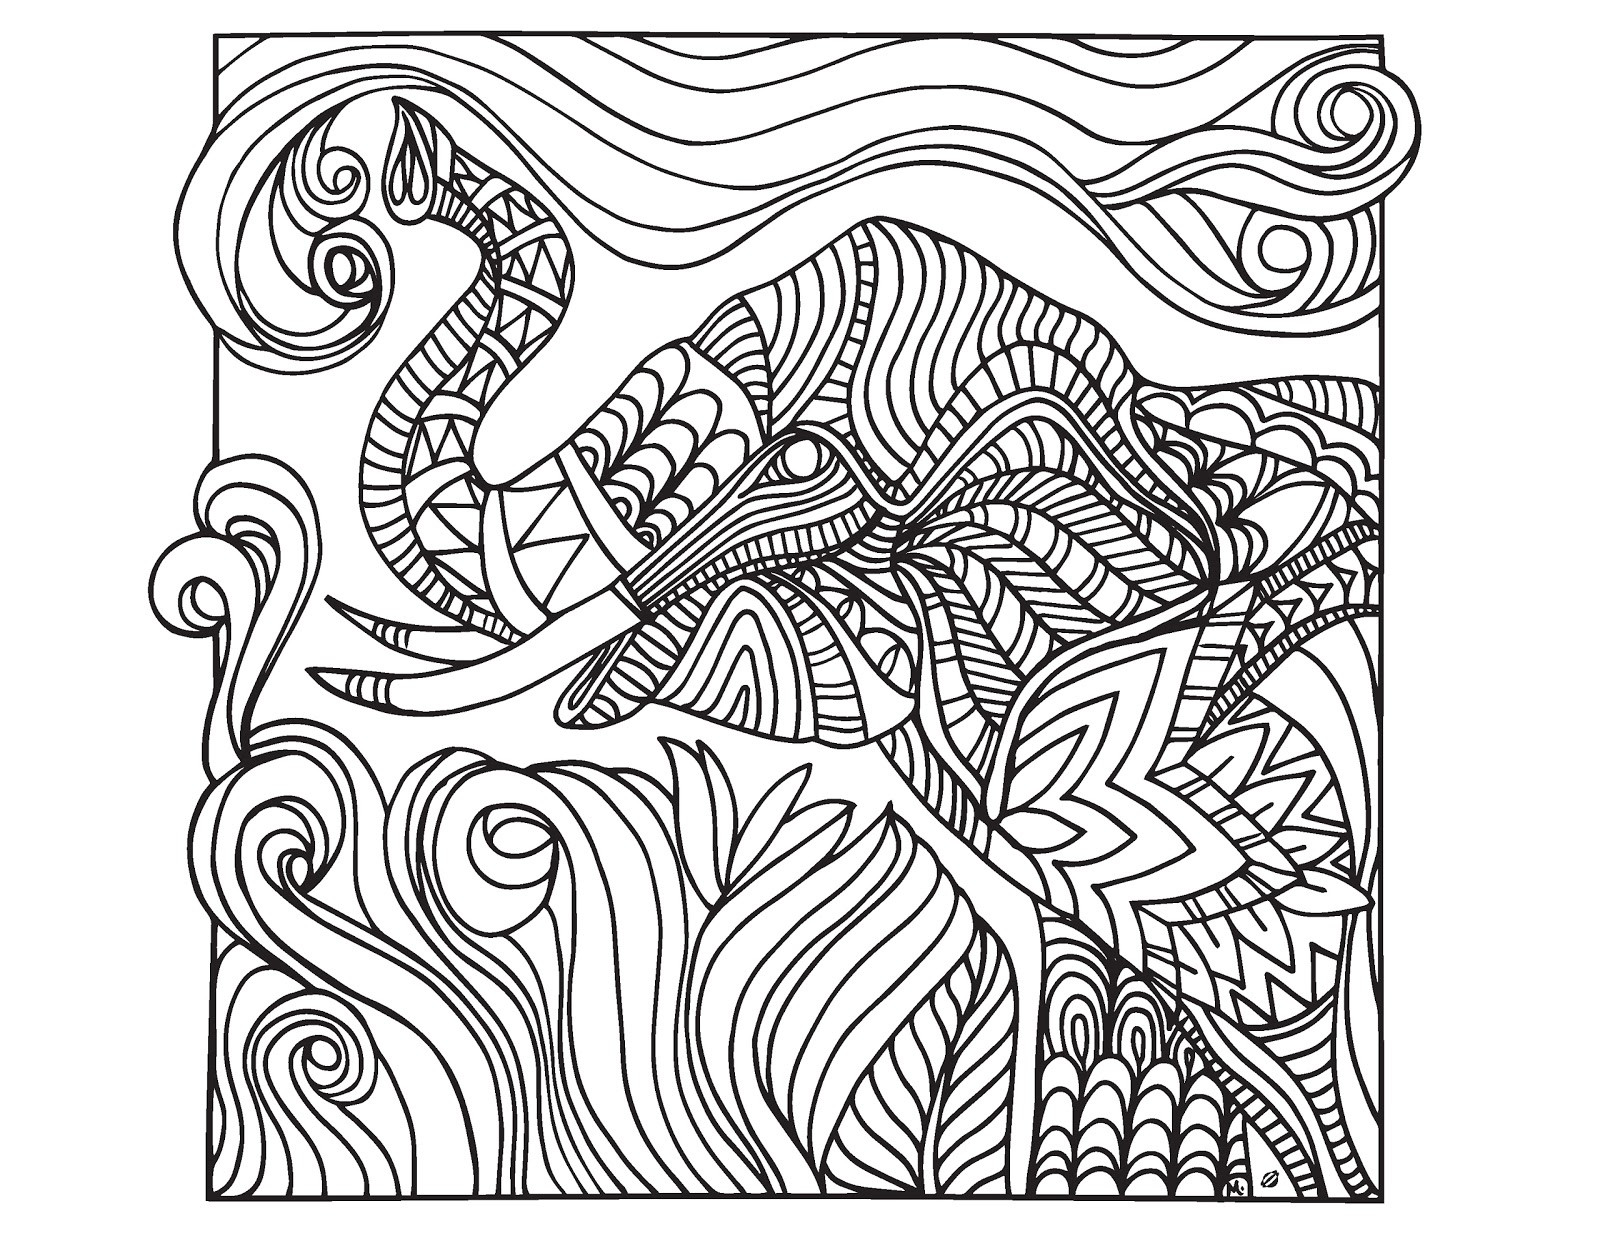 Download Coloring Pages
 LostBumblebee Grown Up Colouring Sheet Elephant